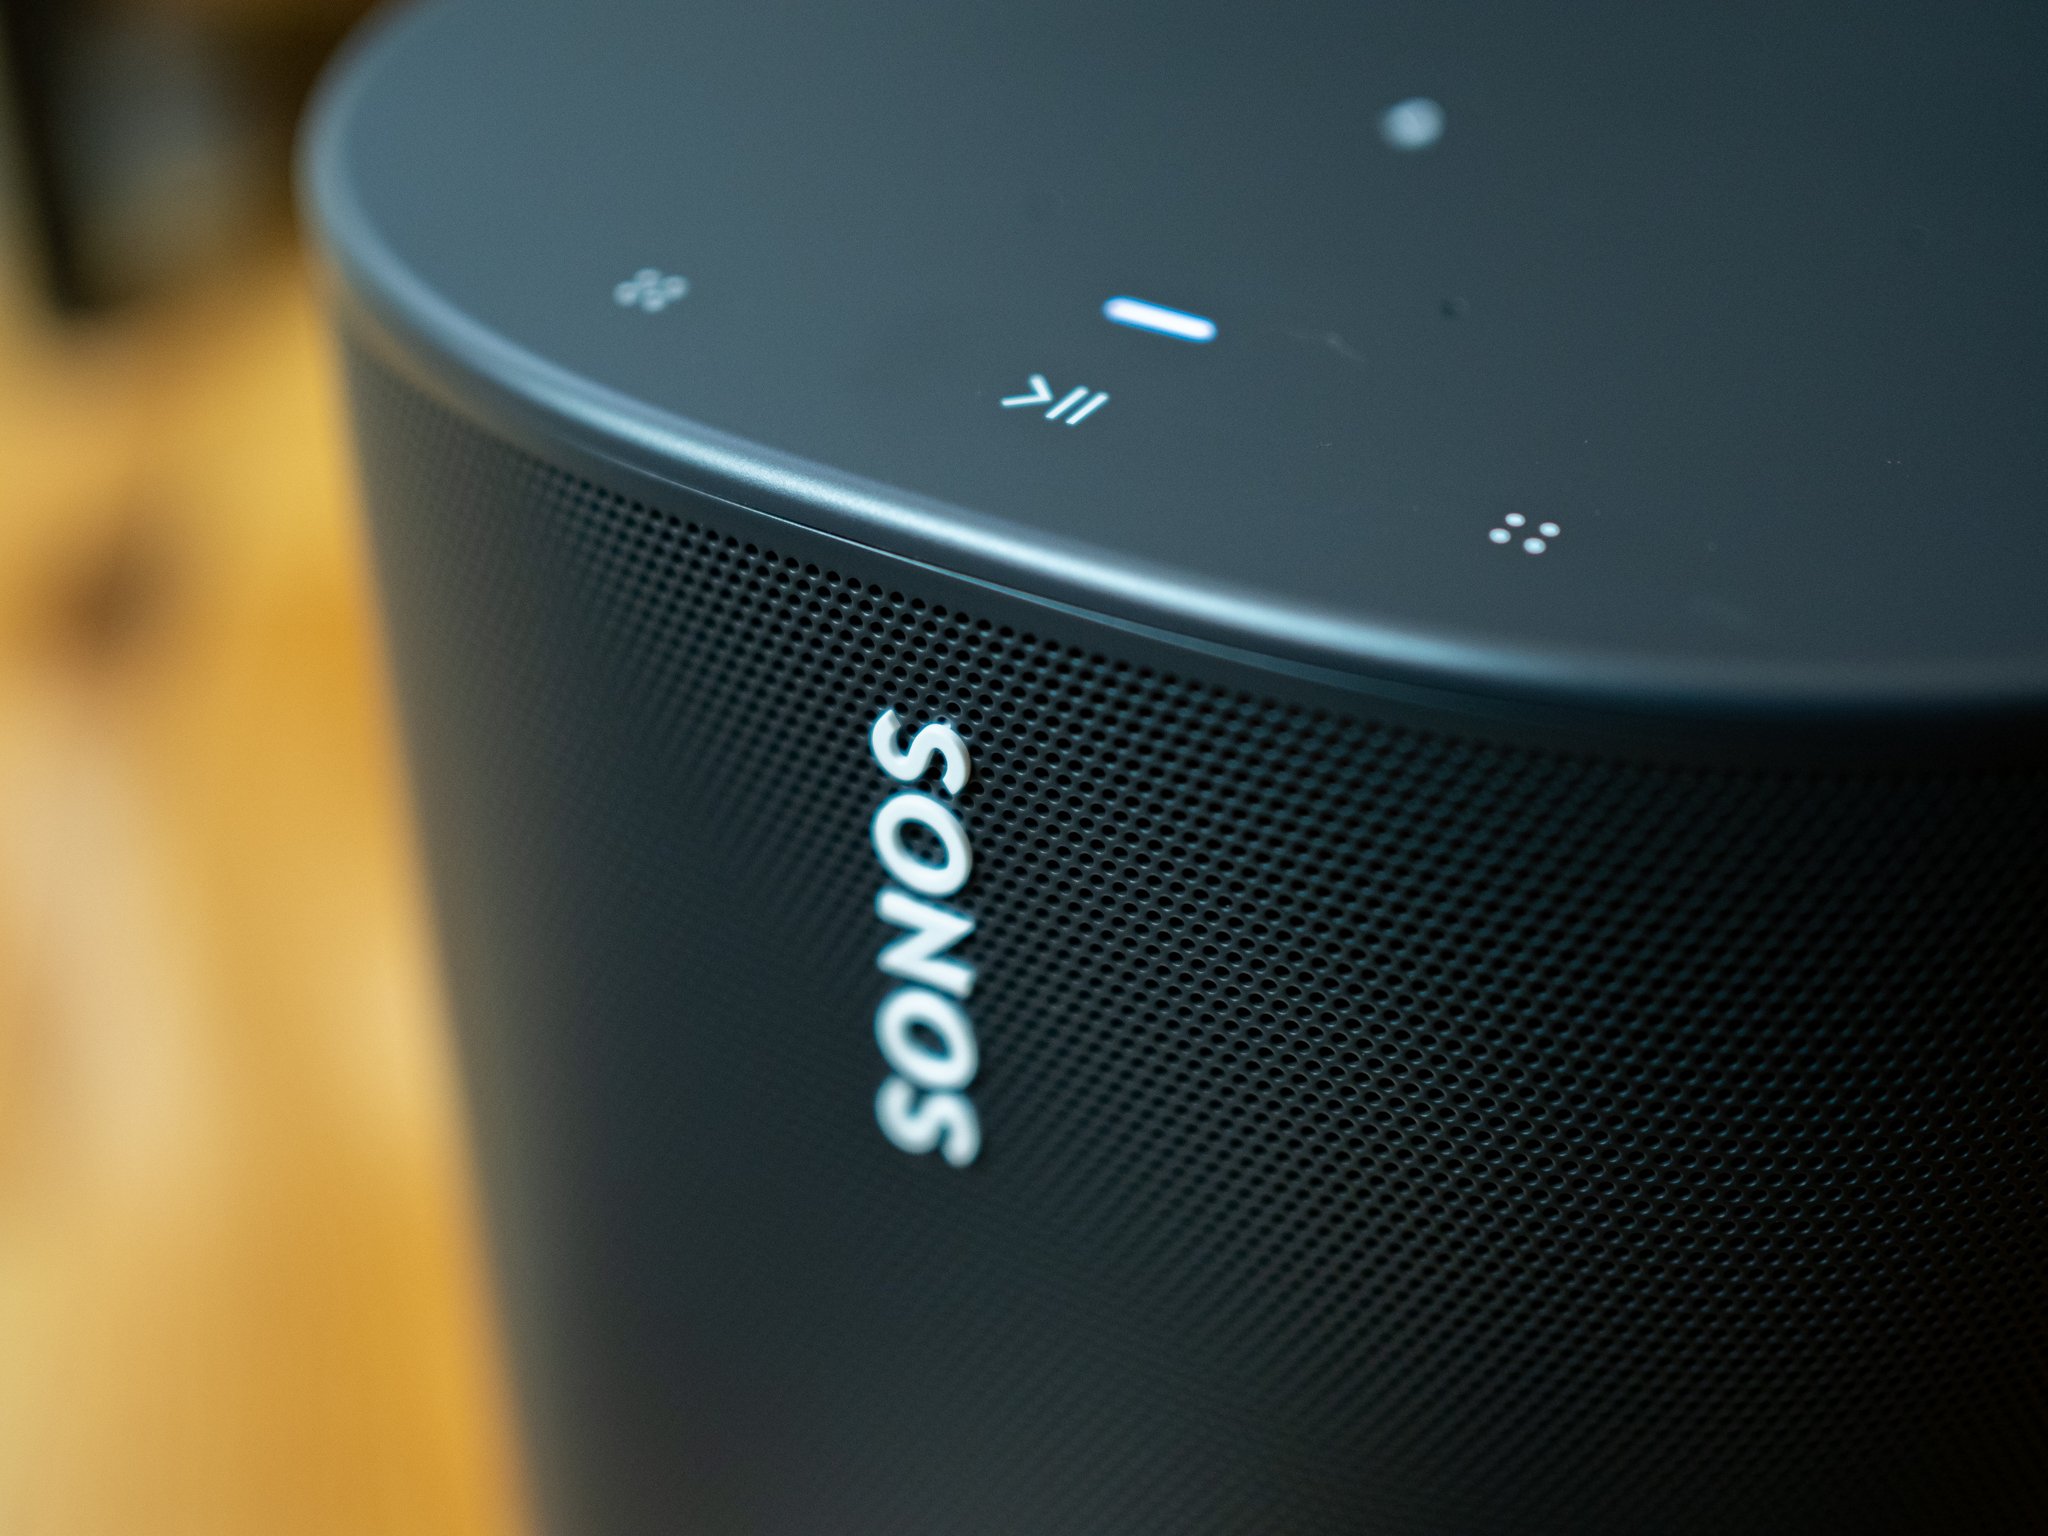 Google products face import ban after Sonos patent infringement ruling